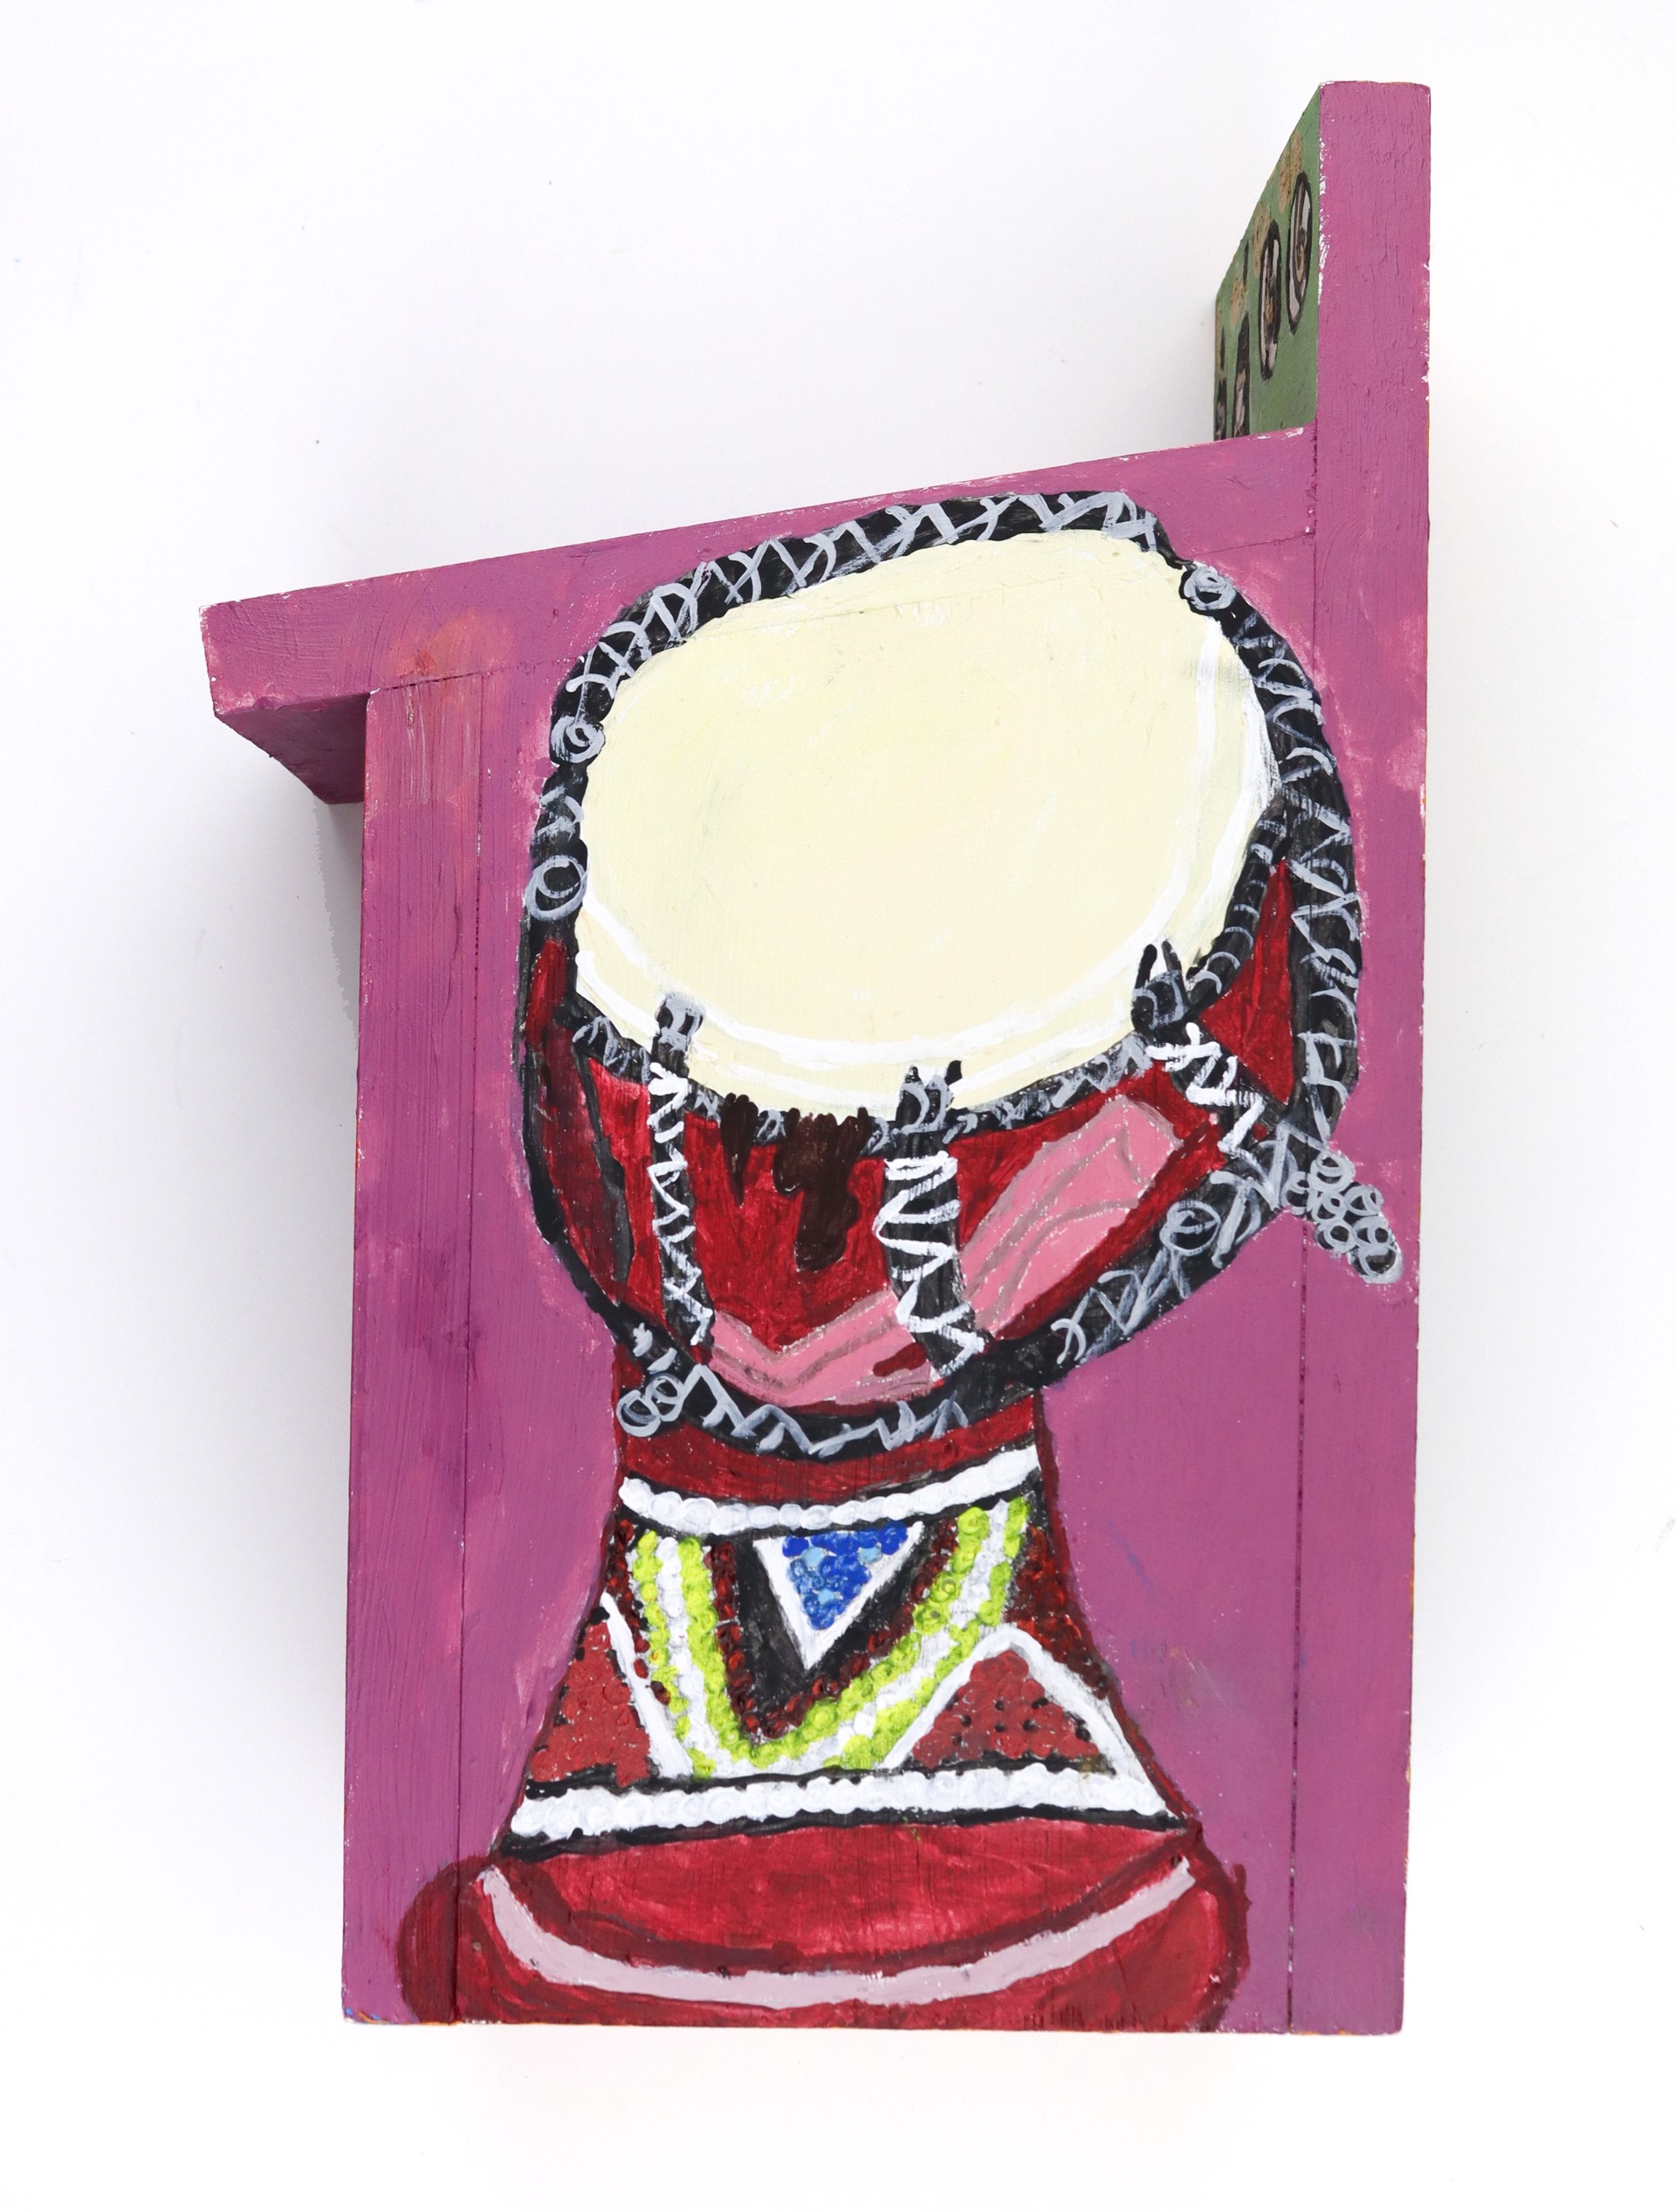 West African Cultural (Birdhouse) by Vanessa Monroe